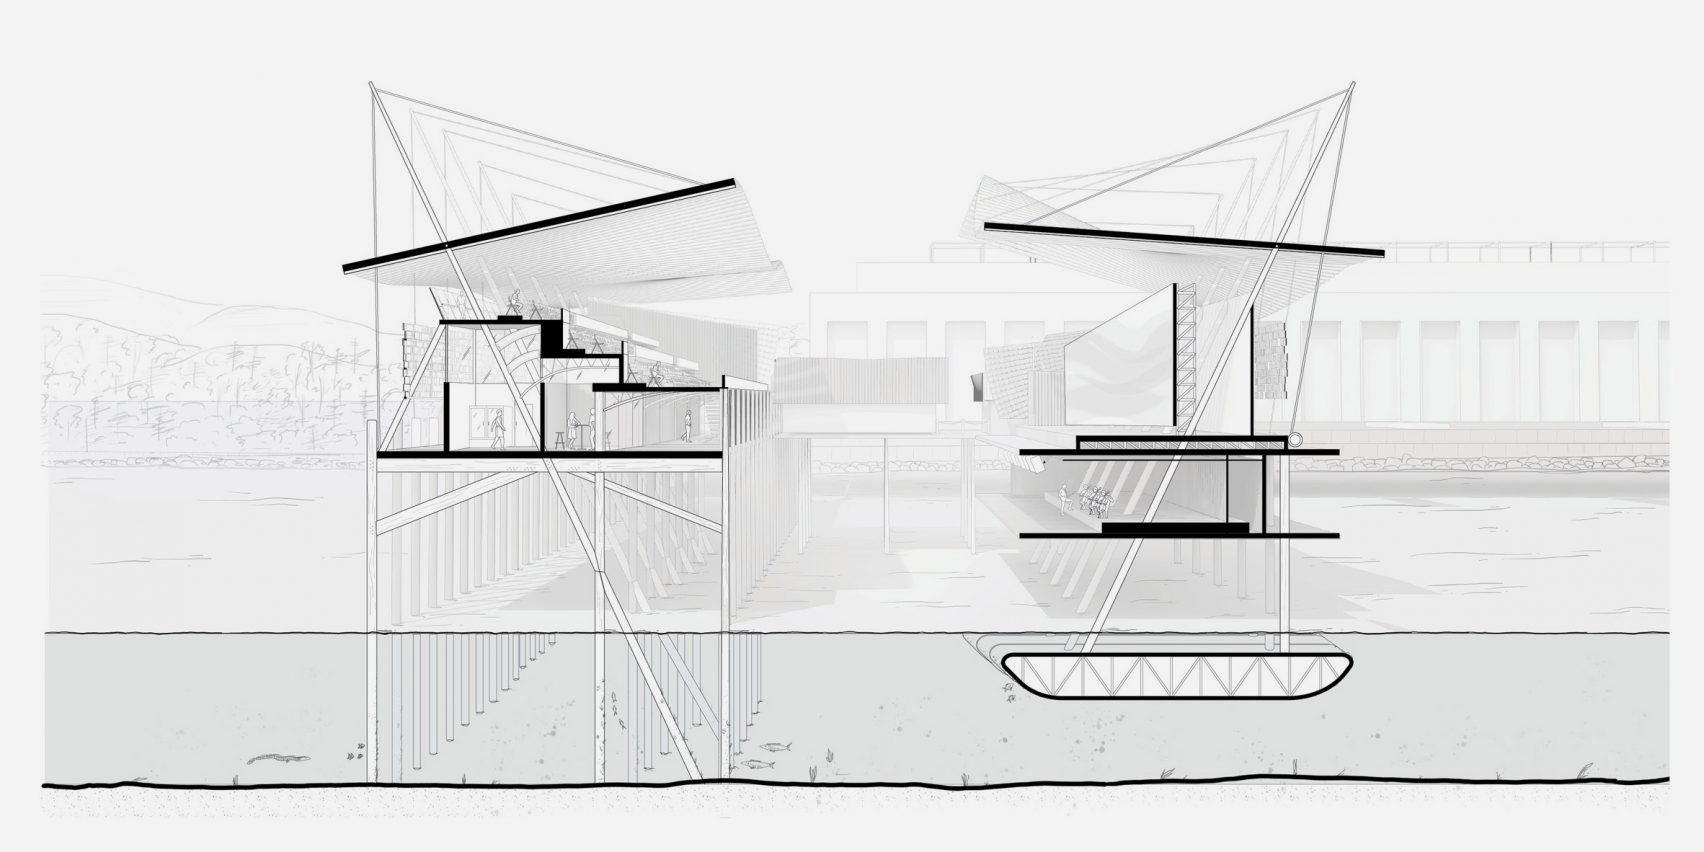 Sectional visualisation showing pier-like theatre 